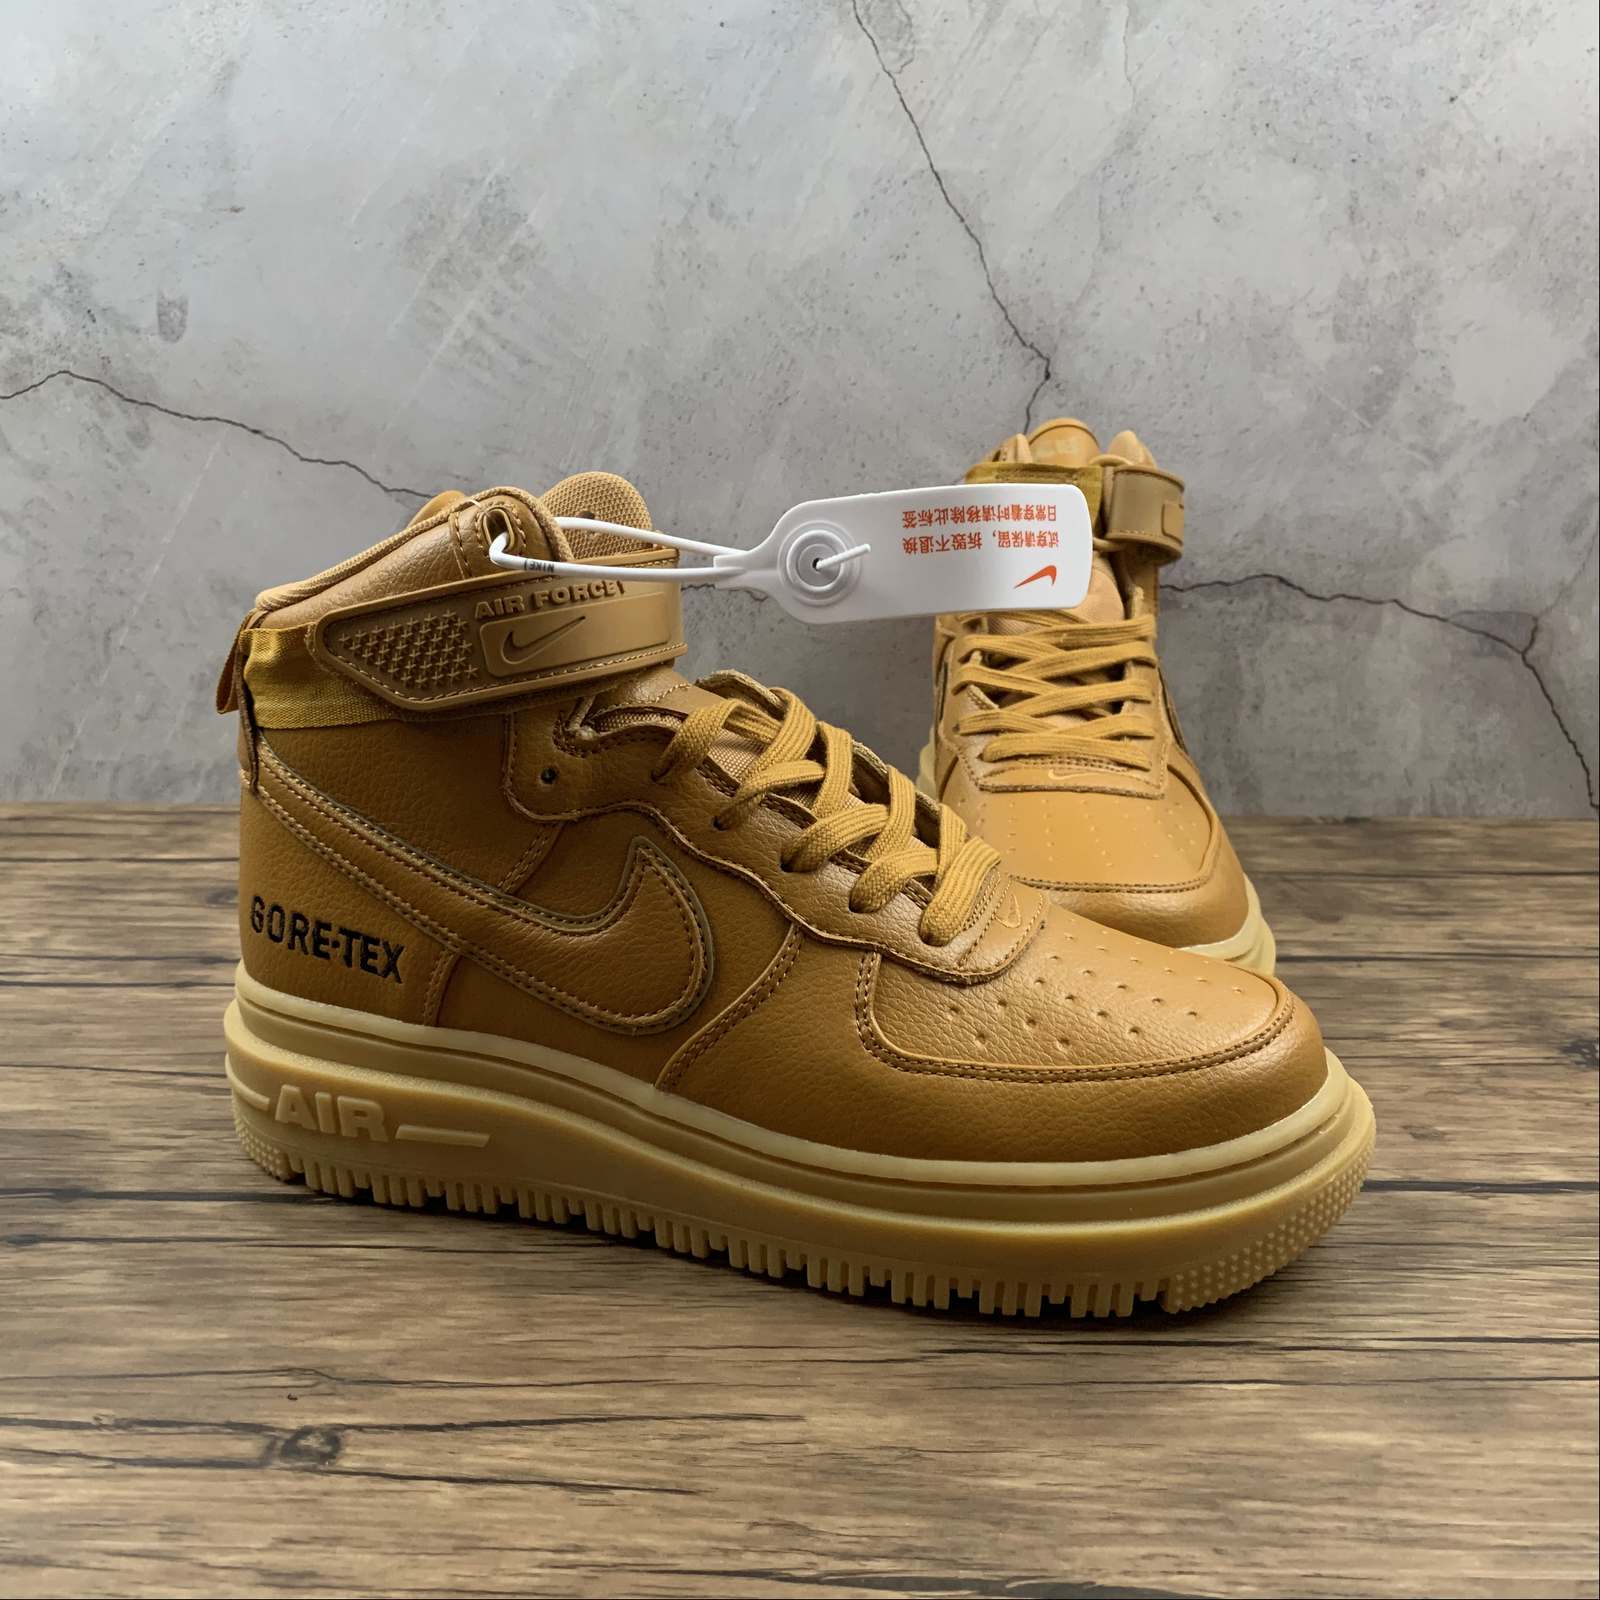 Nike Air Force 1 GoreTex Boot ‘Wheat’ For Sale The Sole Line